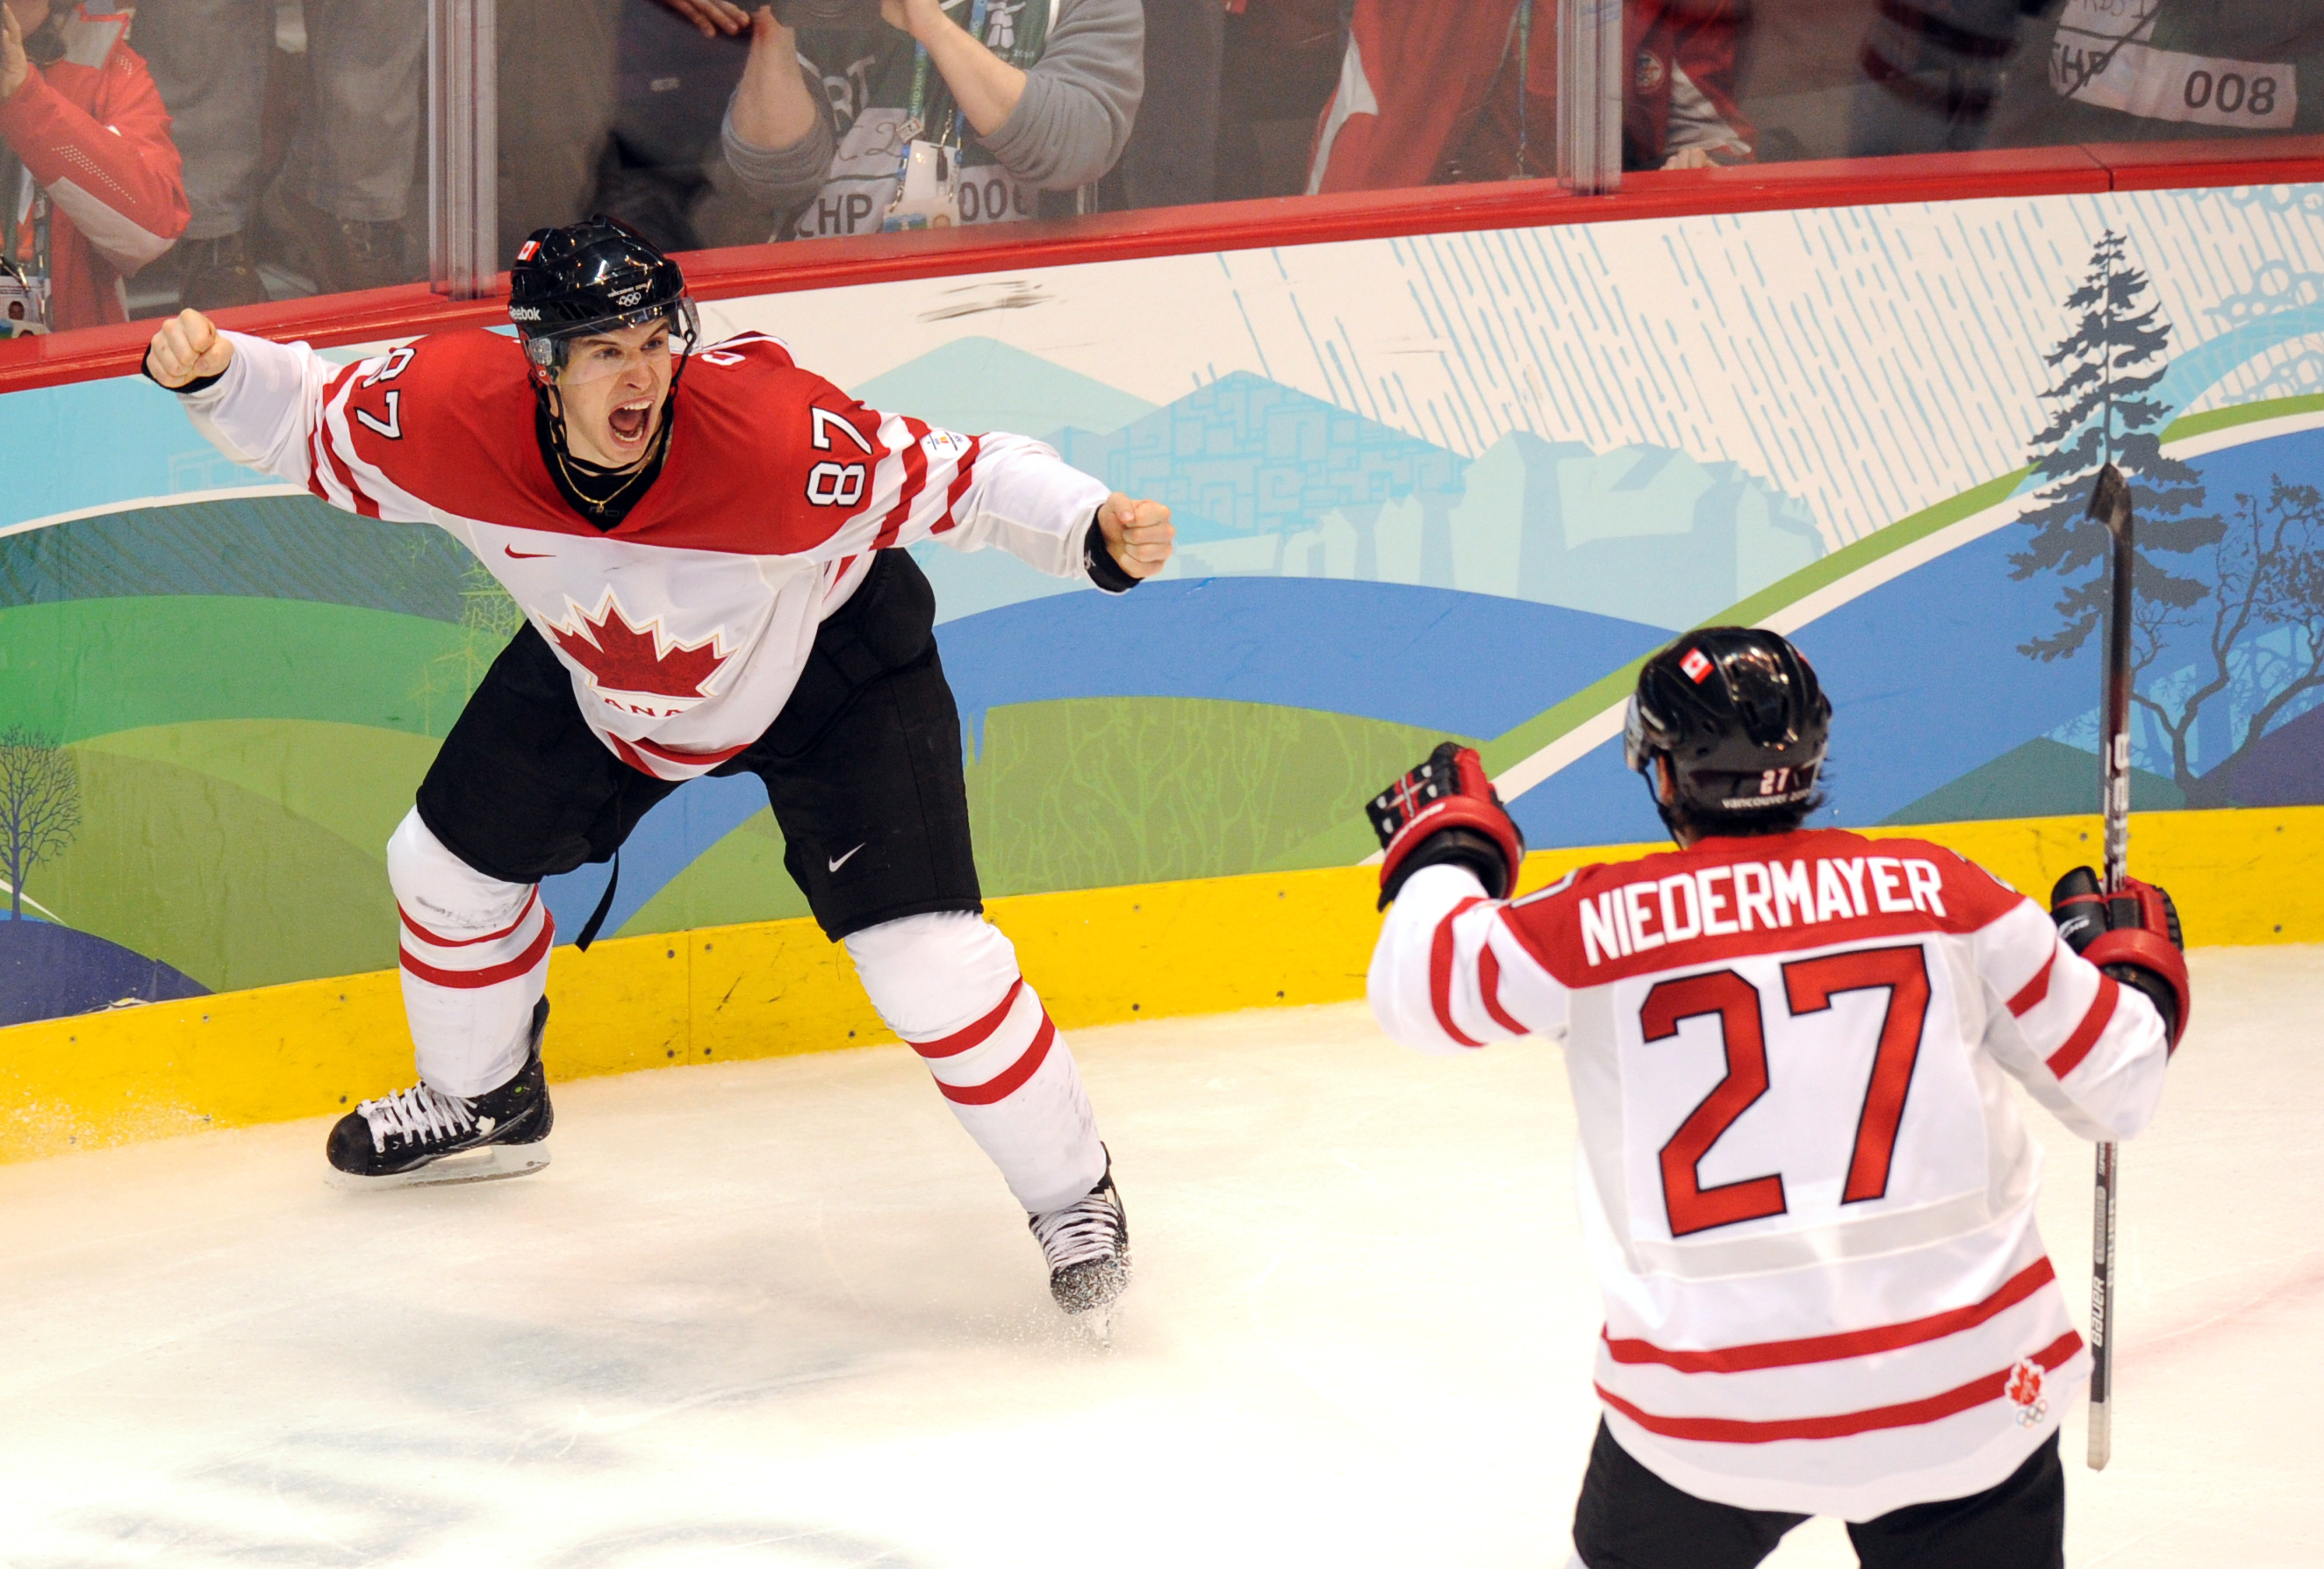 Canadian forward Sidney Crosby (87) and Canadian defenseman Scott Niedermayer (27) jubilate as their team wins gold against the USA in the Men's Gold Medal Hockey match at the Canada Hockey Place during the XXI Winter Olympic Games in Vancouver, Canada on February 28, 2010. (Yuri Kadobnov—AFP/Getty Images)